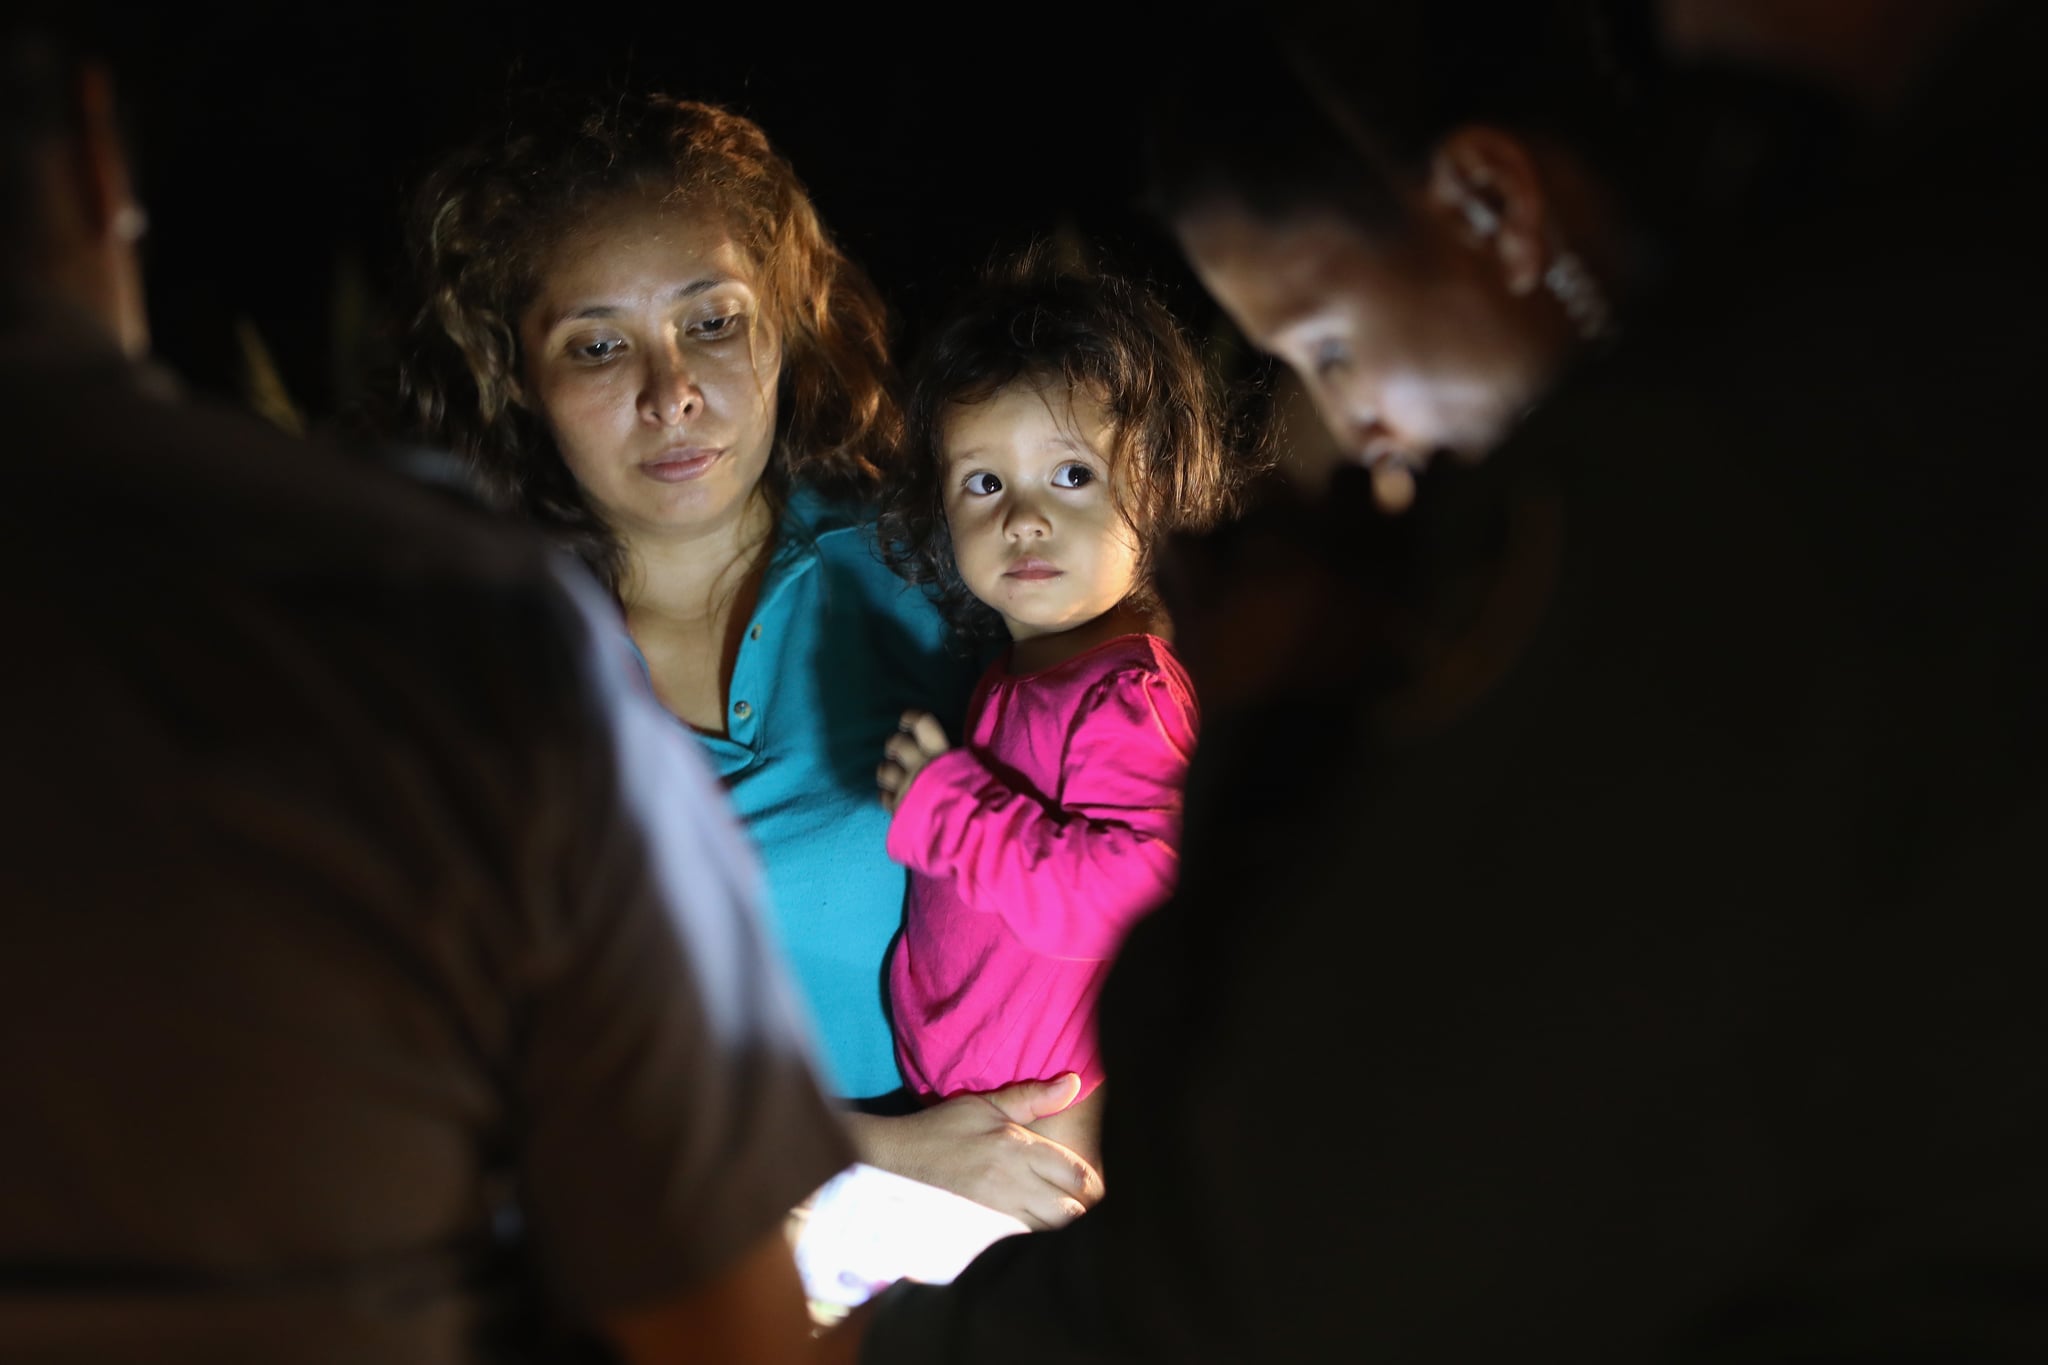 MCALLEN, TX - JUNE 12:  Central American asylum seekers, including a Honduran girl, 2, and her mother, are taken into custody near the U.S.-Mexico border on June 12, 2018 in McAllen, Texas. The group of women and children had rafted across the Rio Grande from Mexico and were detained by U.S. Border Patrol agents before being sent to a processing centre for possible separation. Customs and Border Protection (CBP) is executing the Trump administration's zero tolerance policy towards undocumented immigrants. U.S. Attorney General Jeff Sessions also said that domestic and gang violence in immigrants' country of origin would no longer qualify them for political asylum status.  (Photo by John Moore/Getty Images)